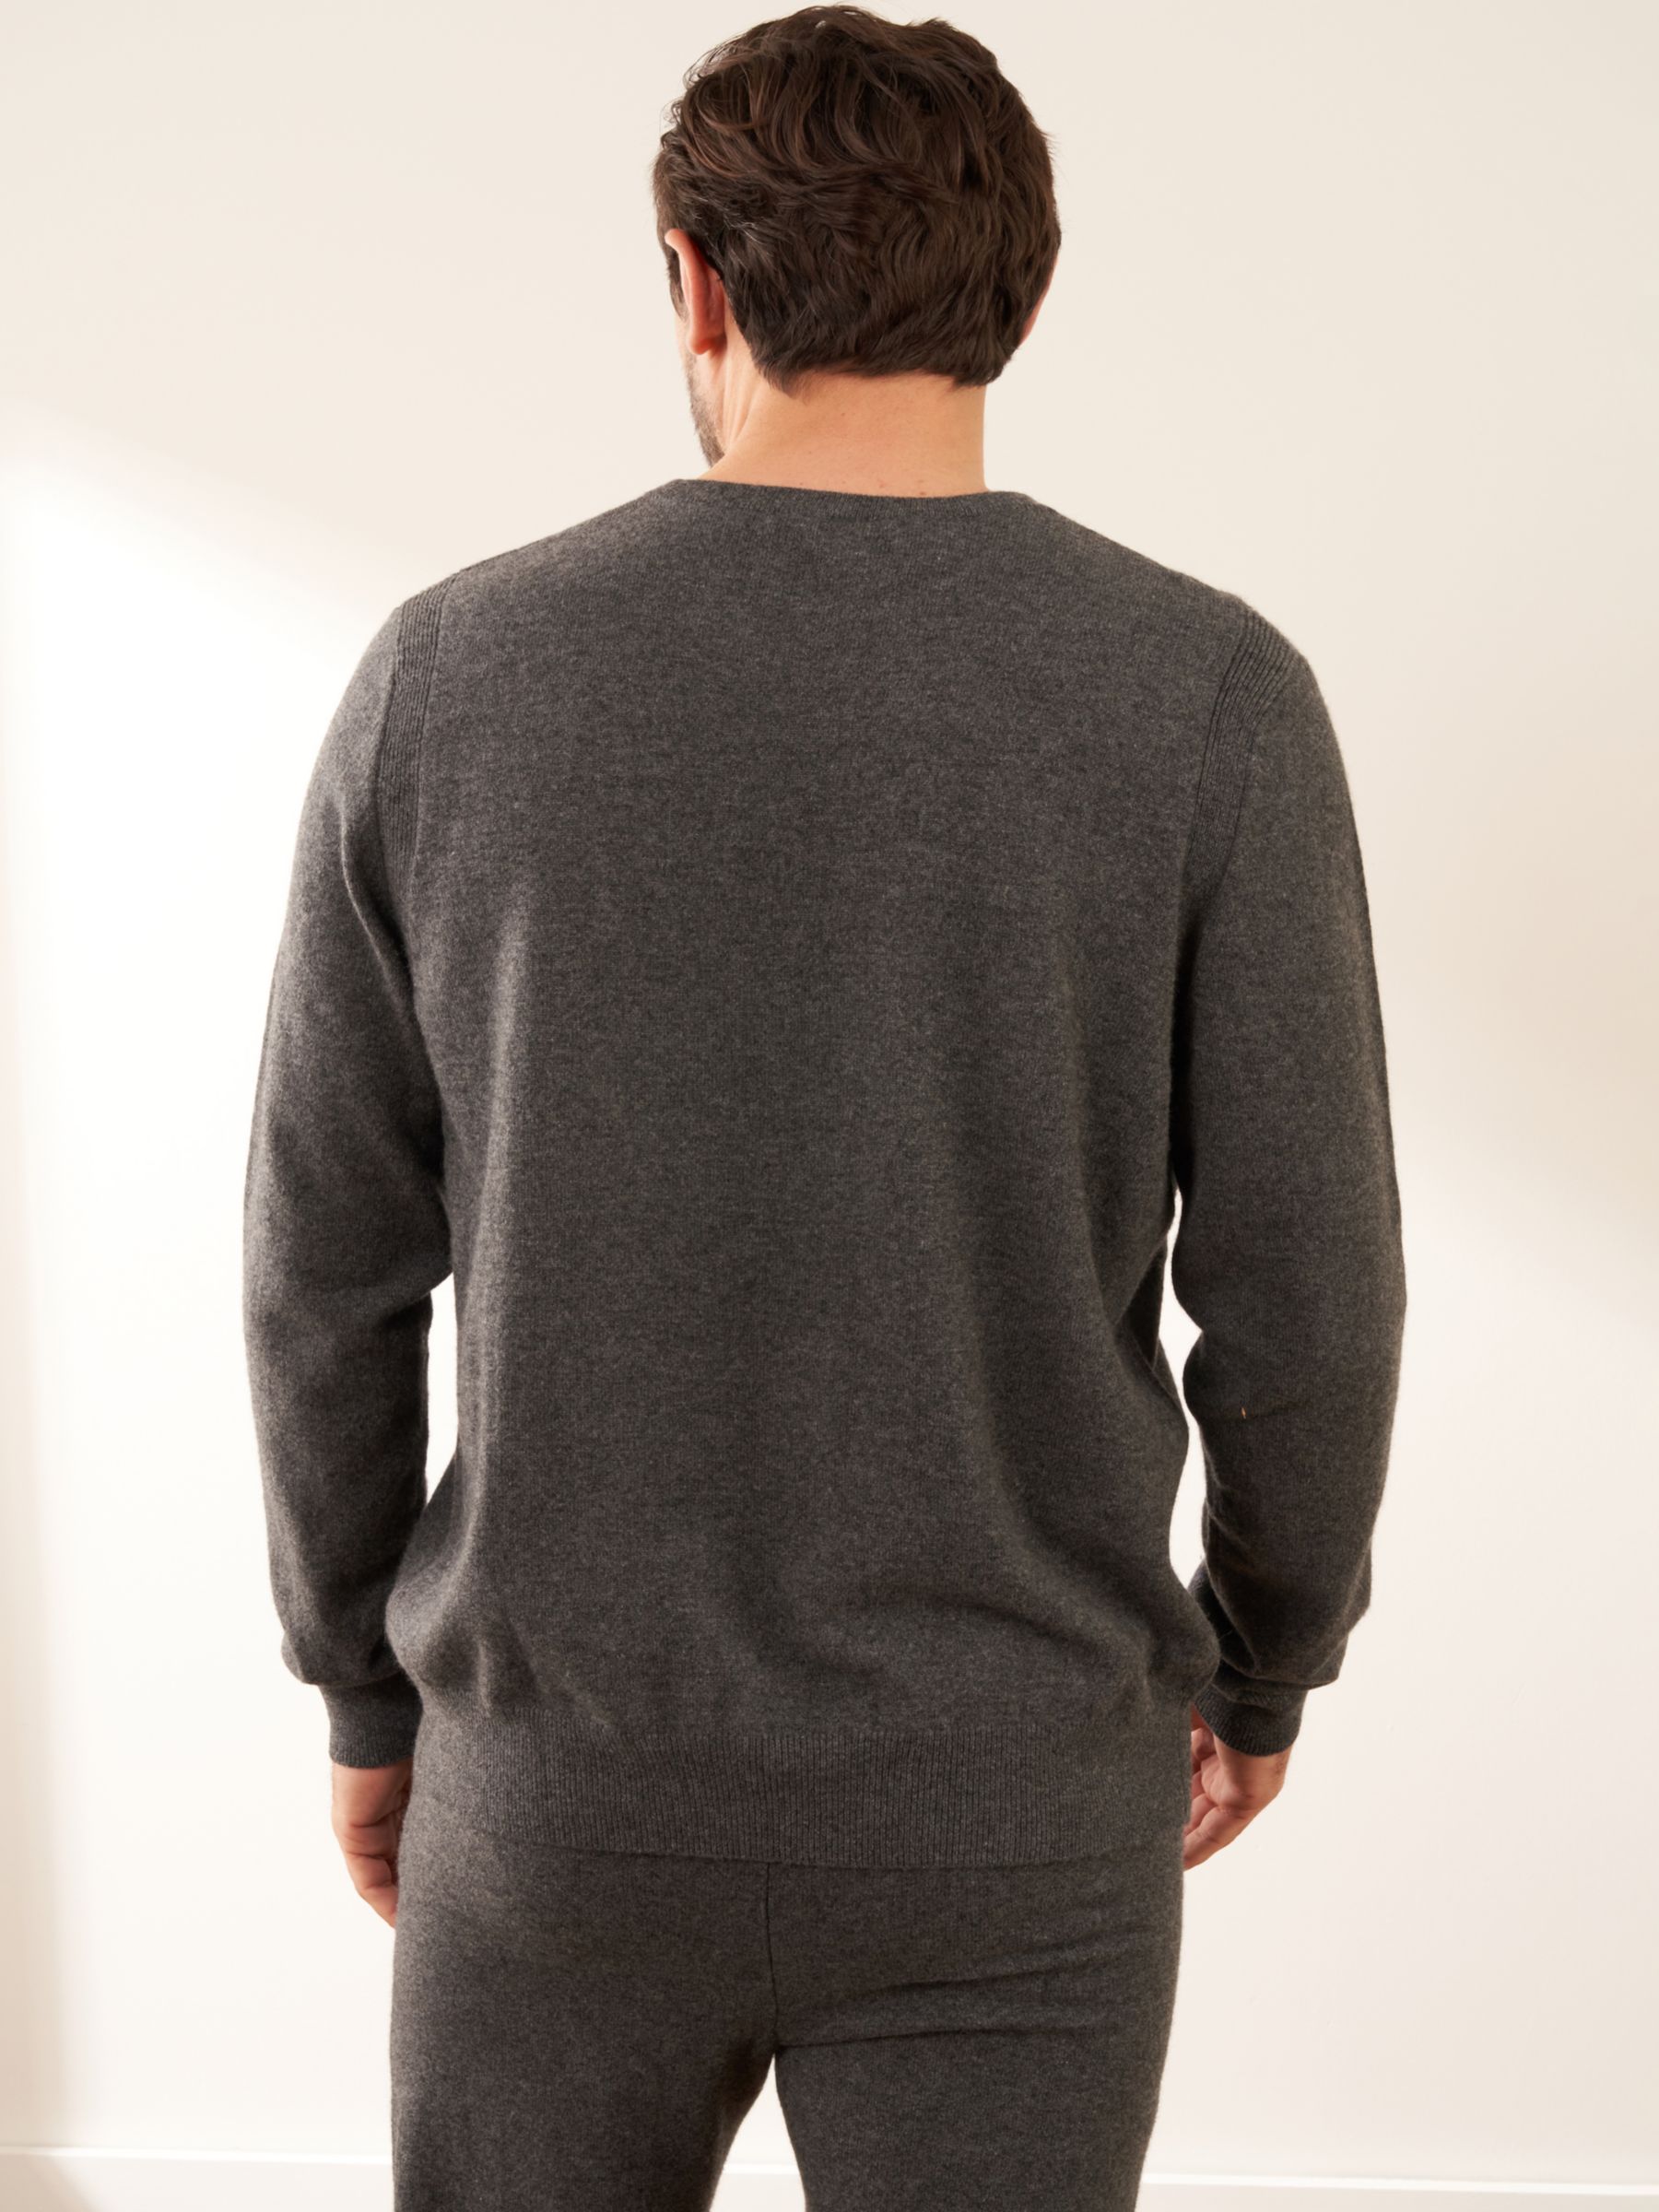 Truly Cashmere Crew Neck Jumper, Charcoal Marl, S